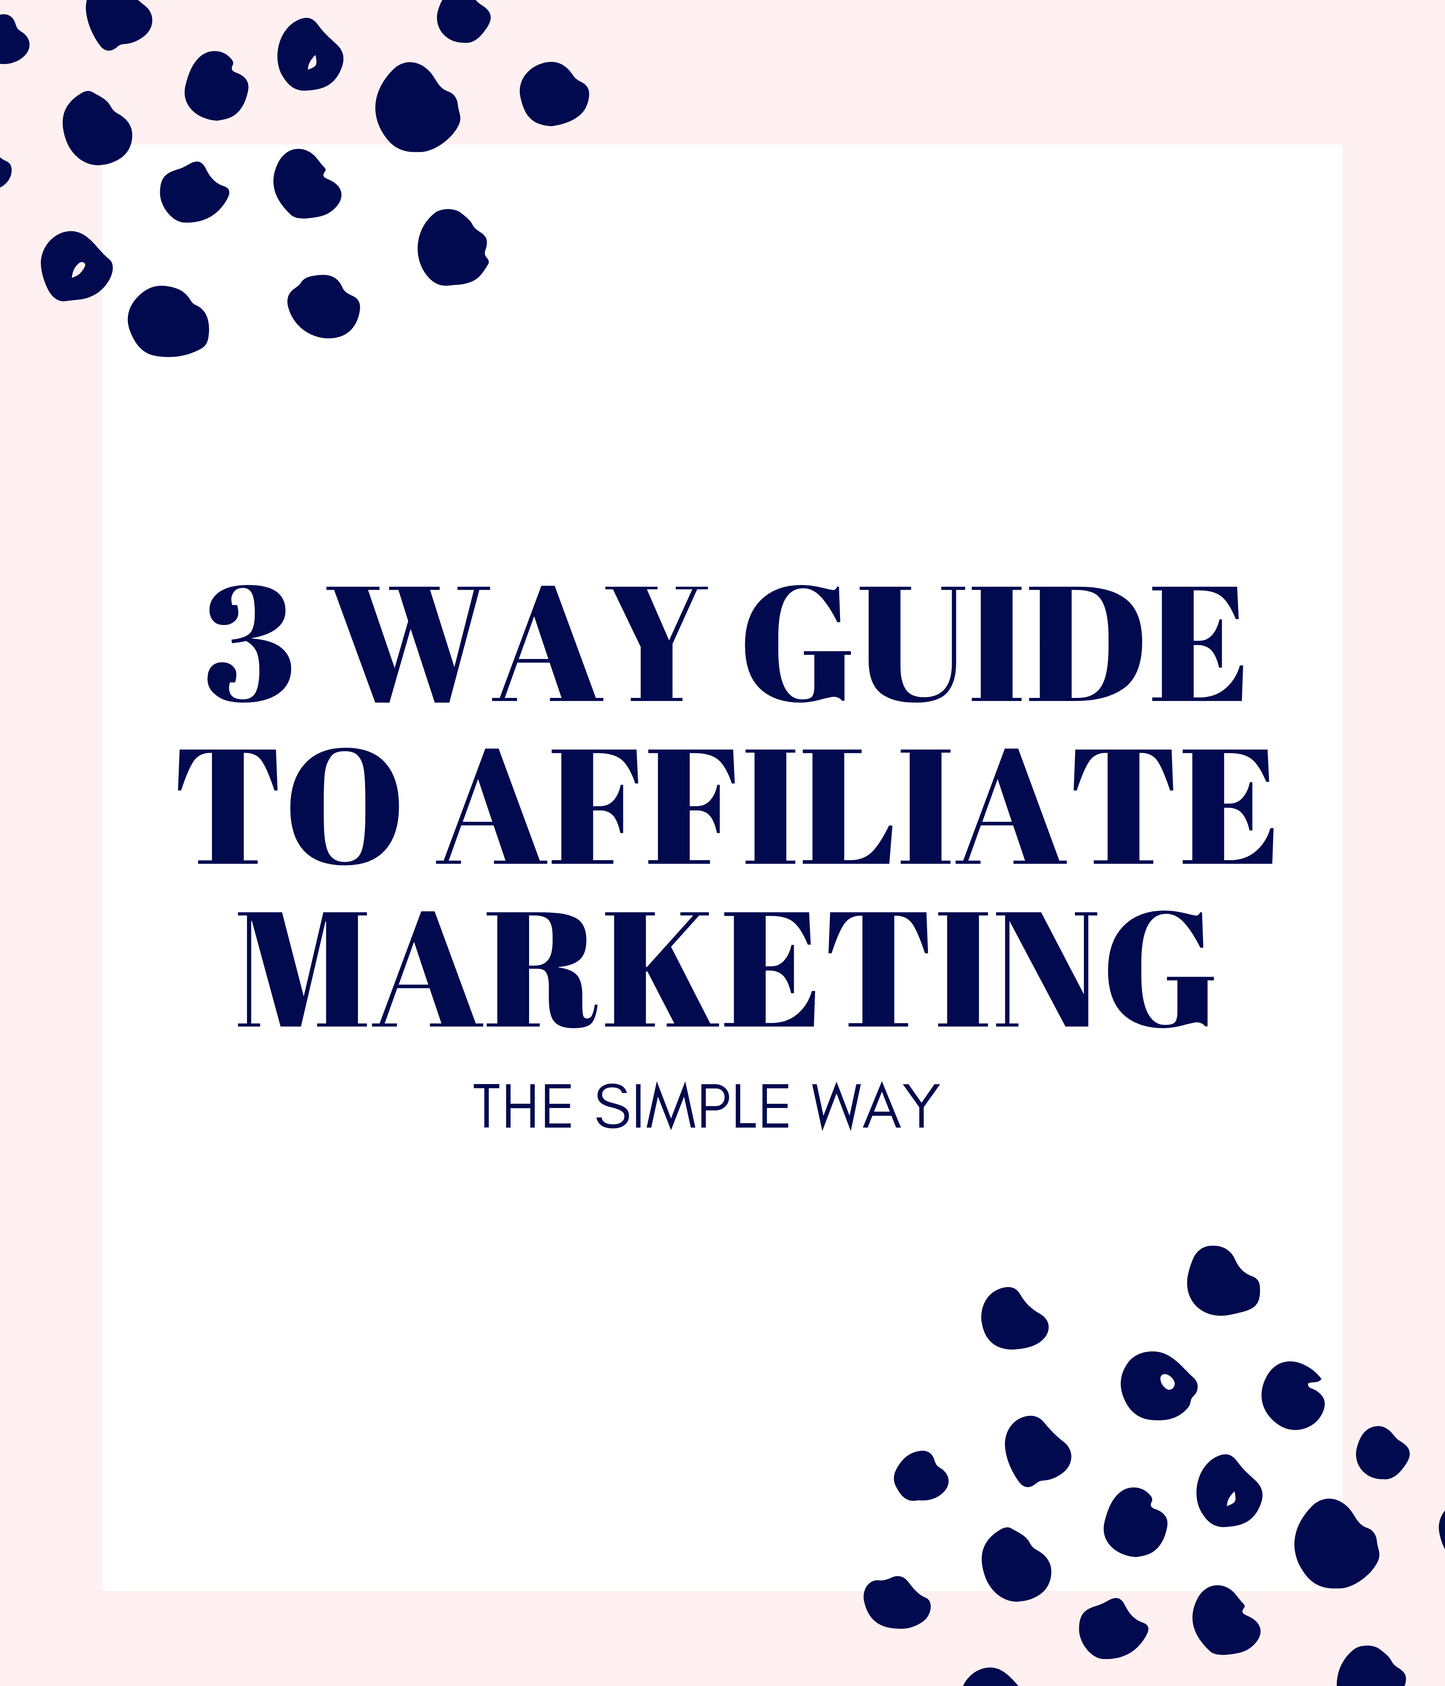 3 WAY GUIDE TO AFFILIATE MARKETING : THE SIMPLE WAY